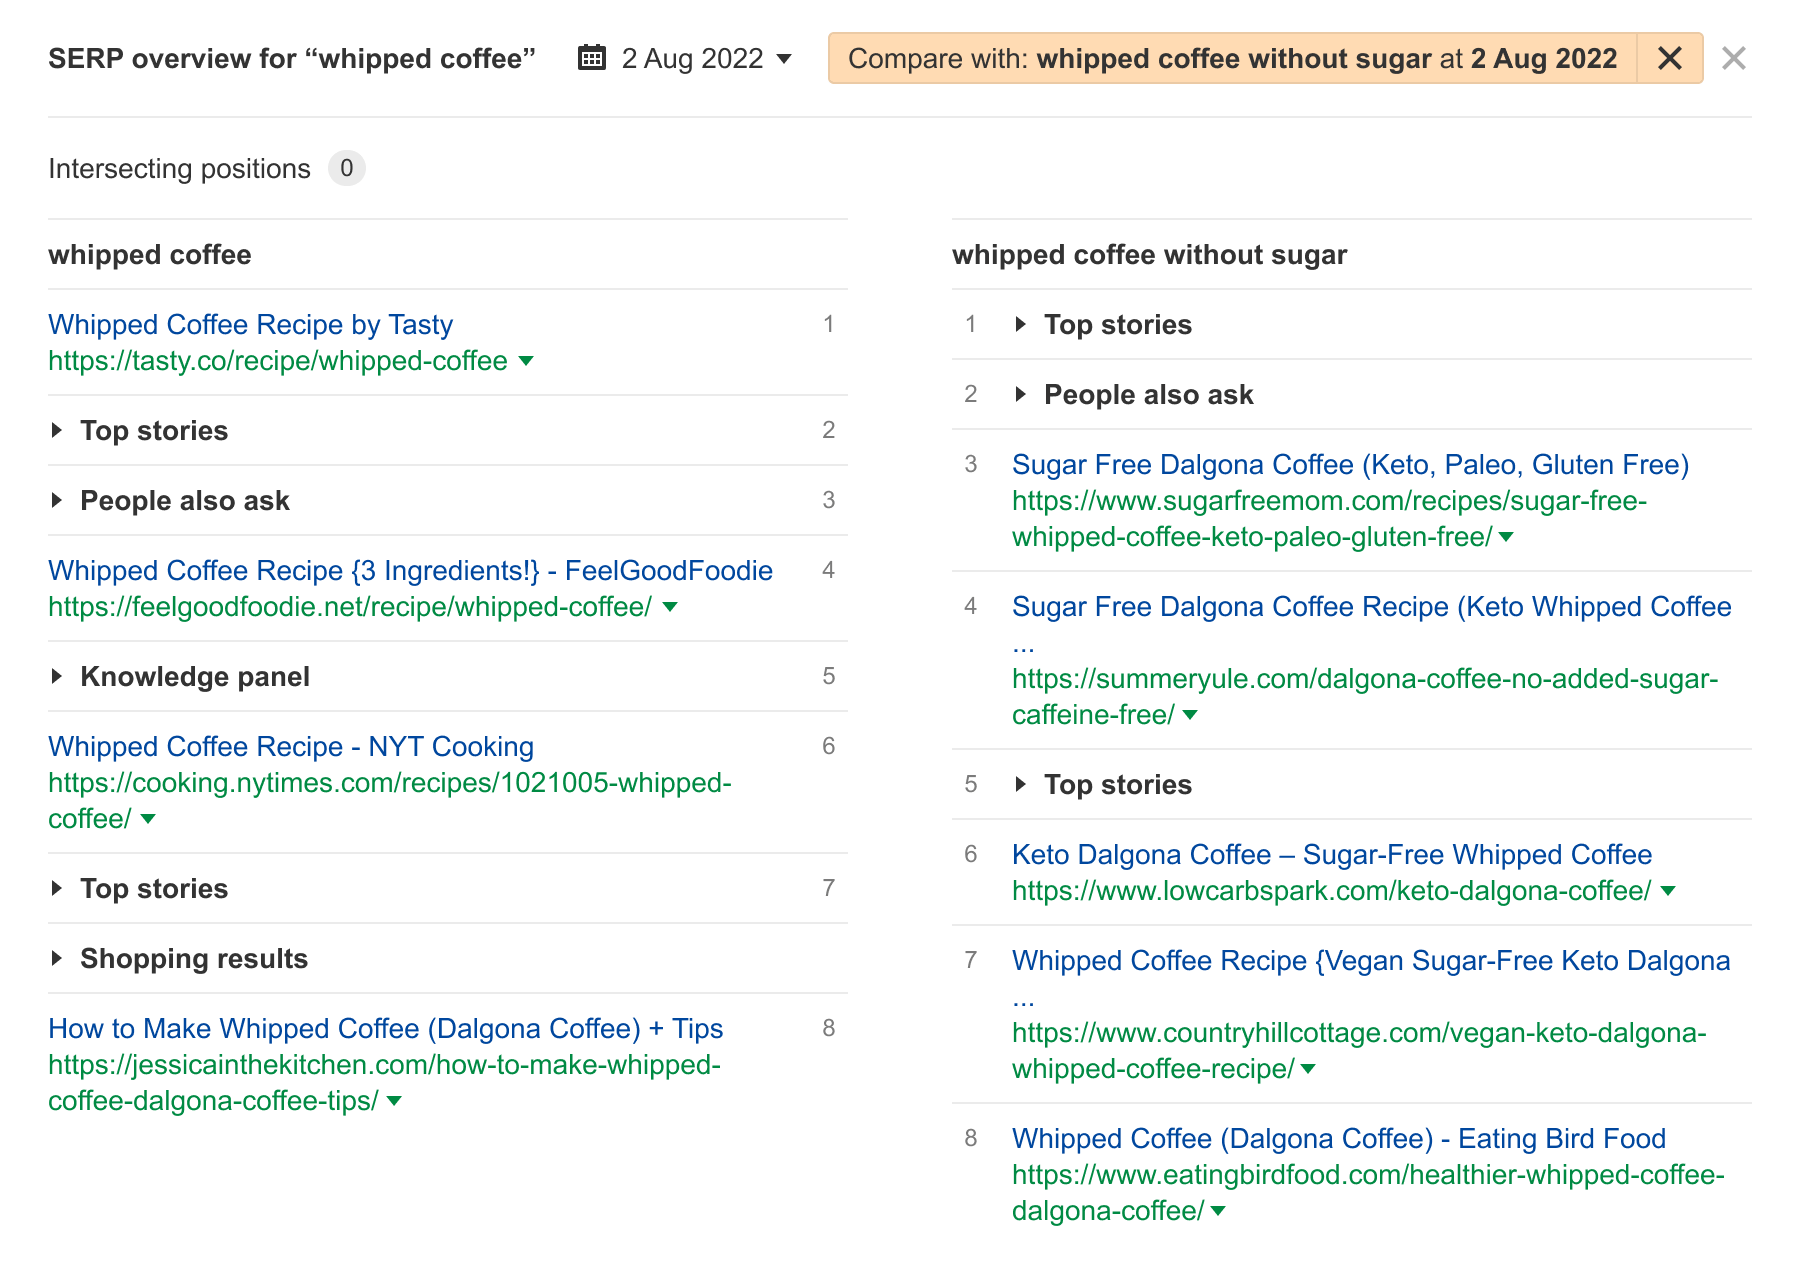 Side-by-side comparison of the SERP overview of "whipped coffee" and "whipped coffee without sugar," respectively